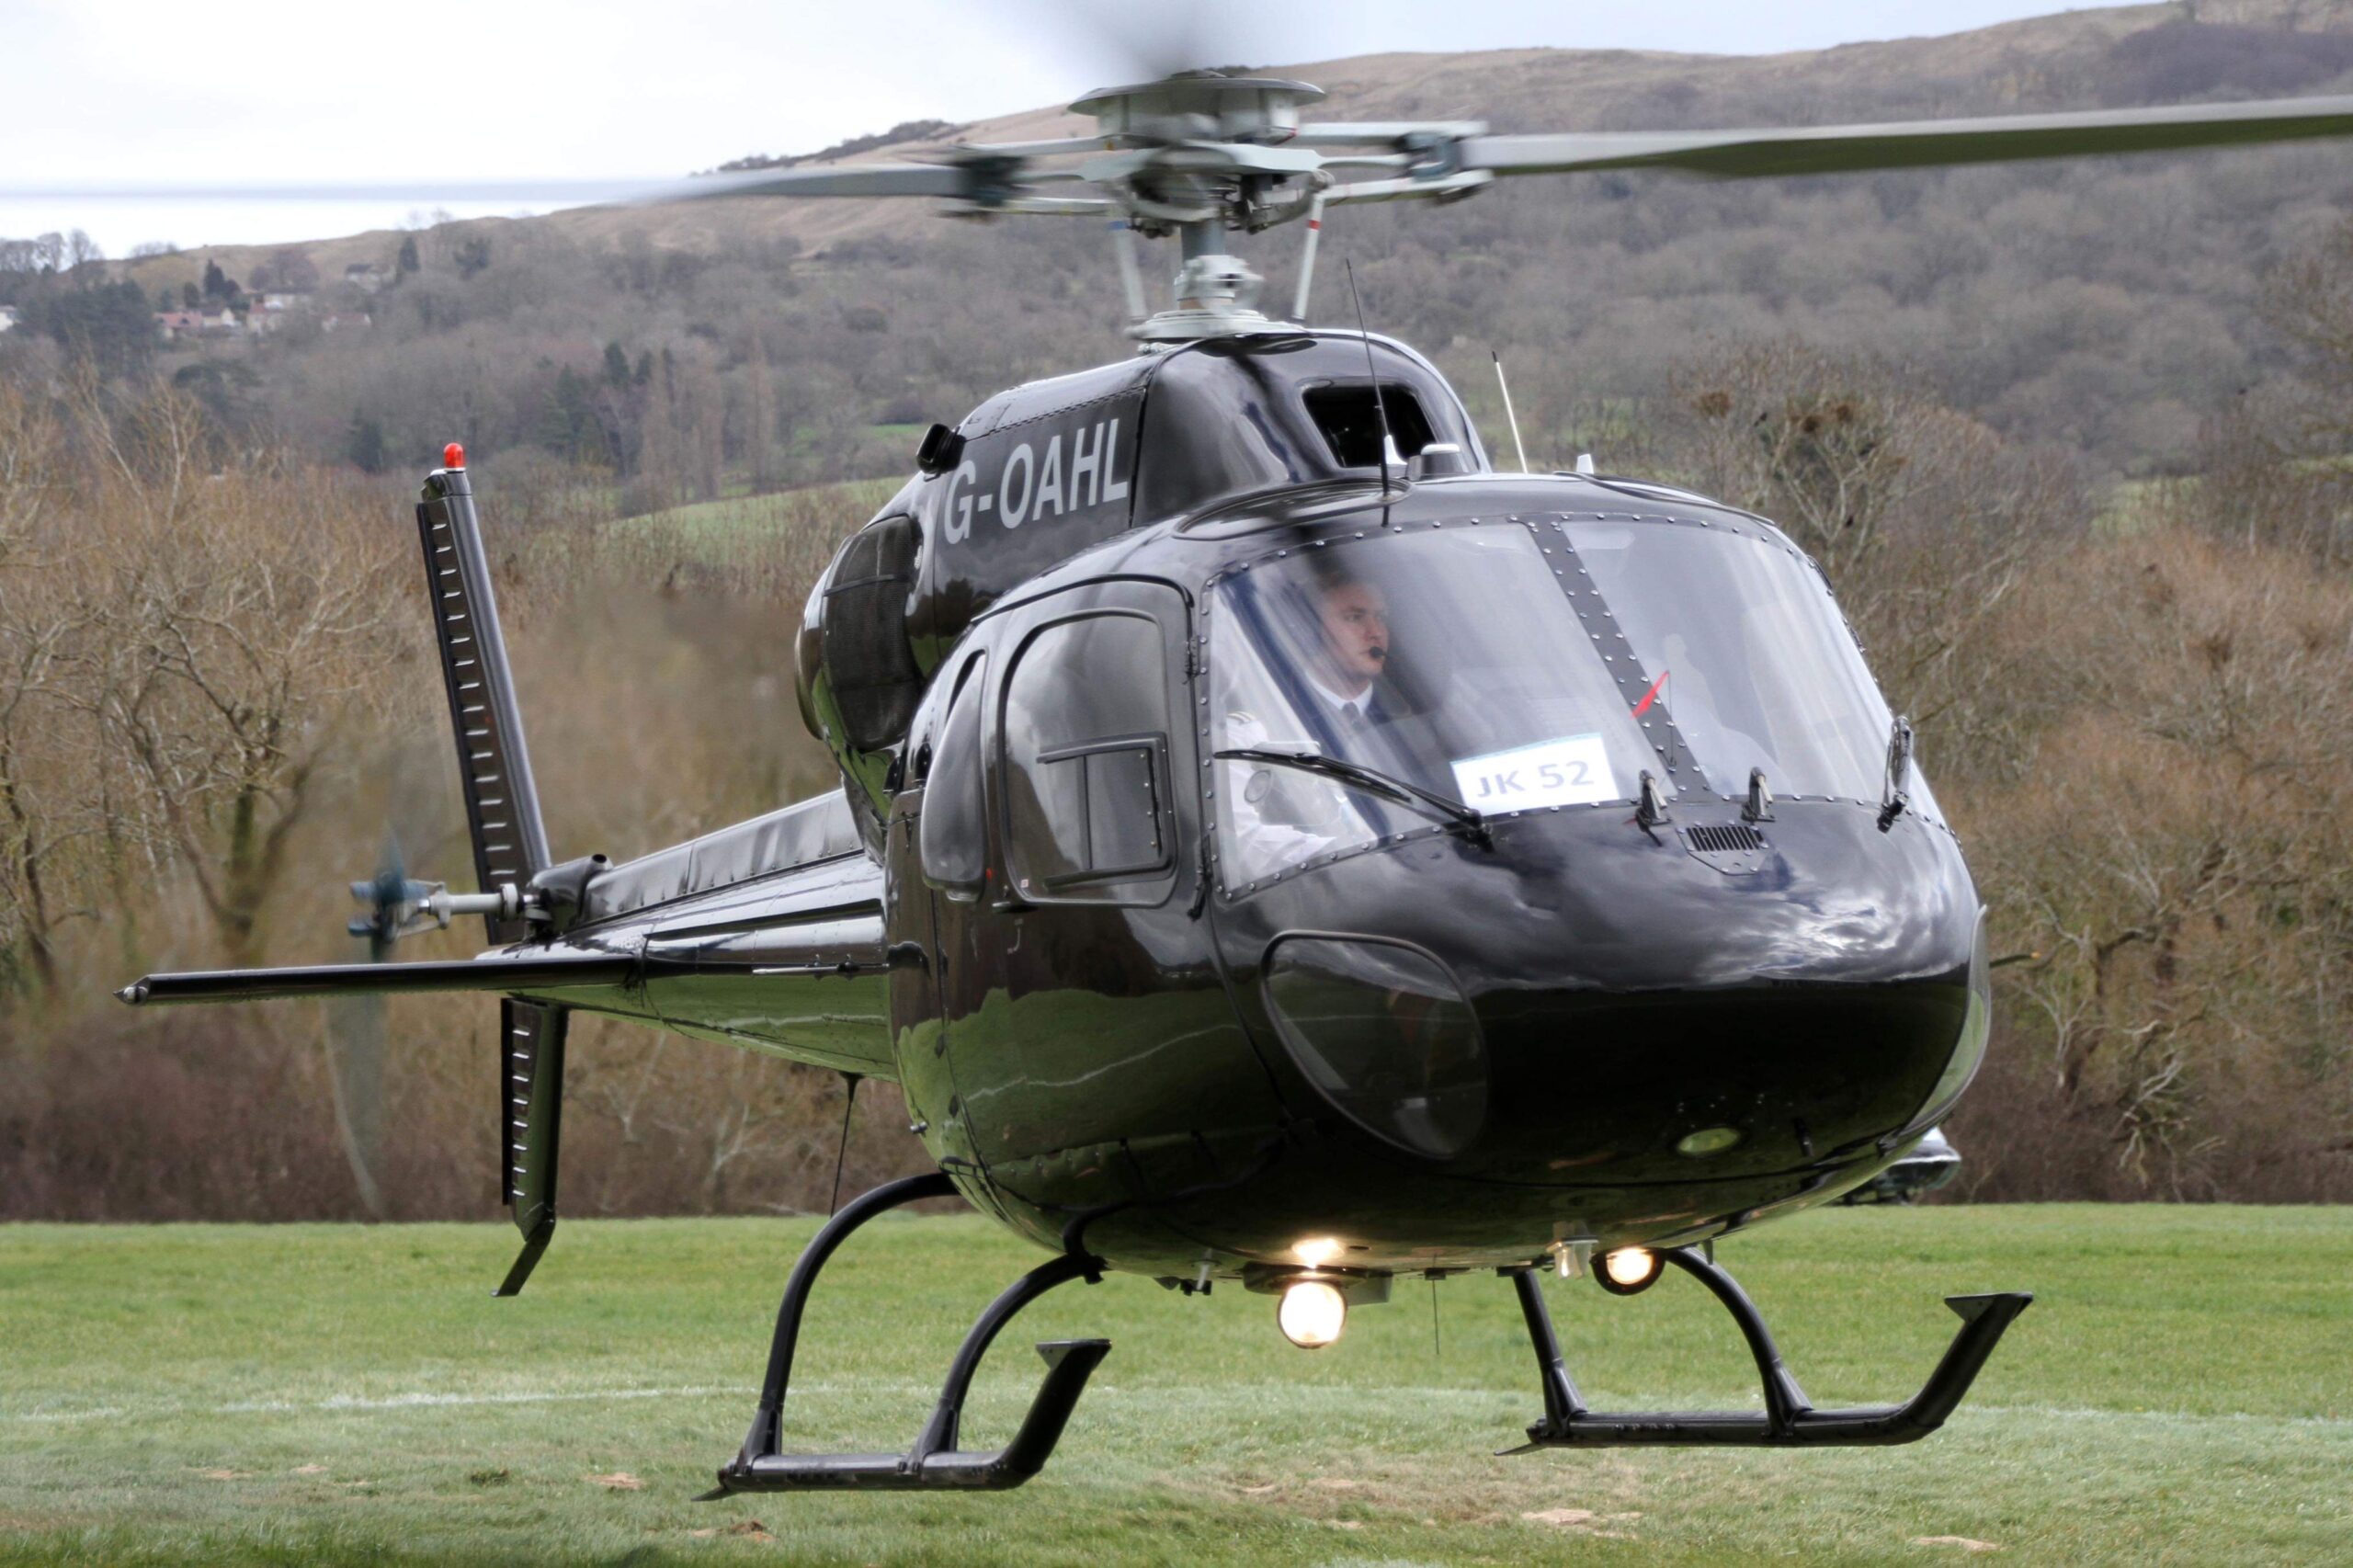 Travel To The Royal Ascot With Private Helicopter Hire